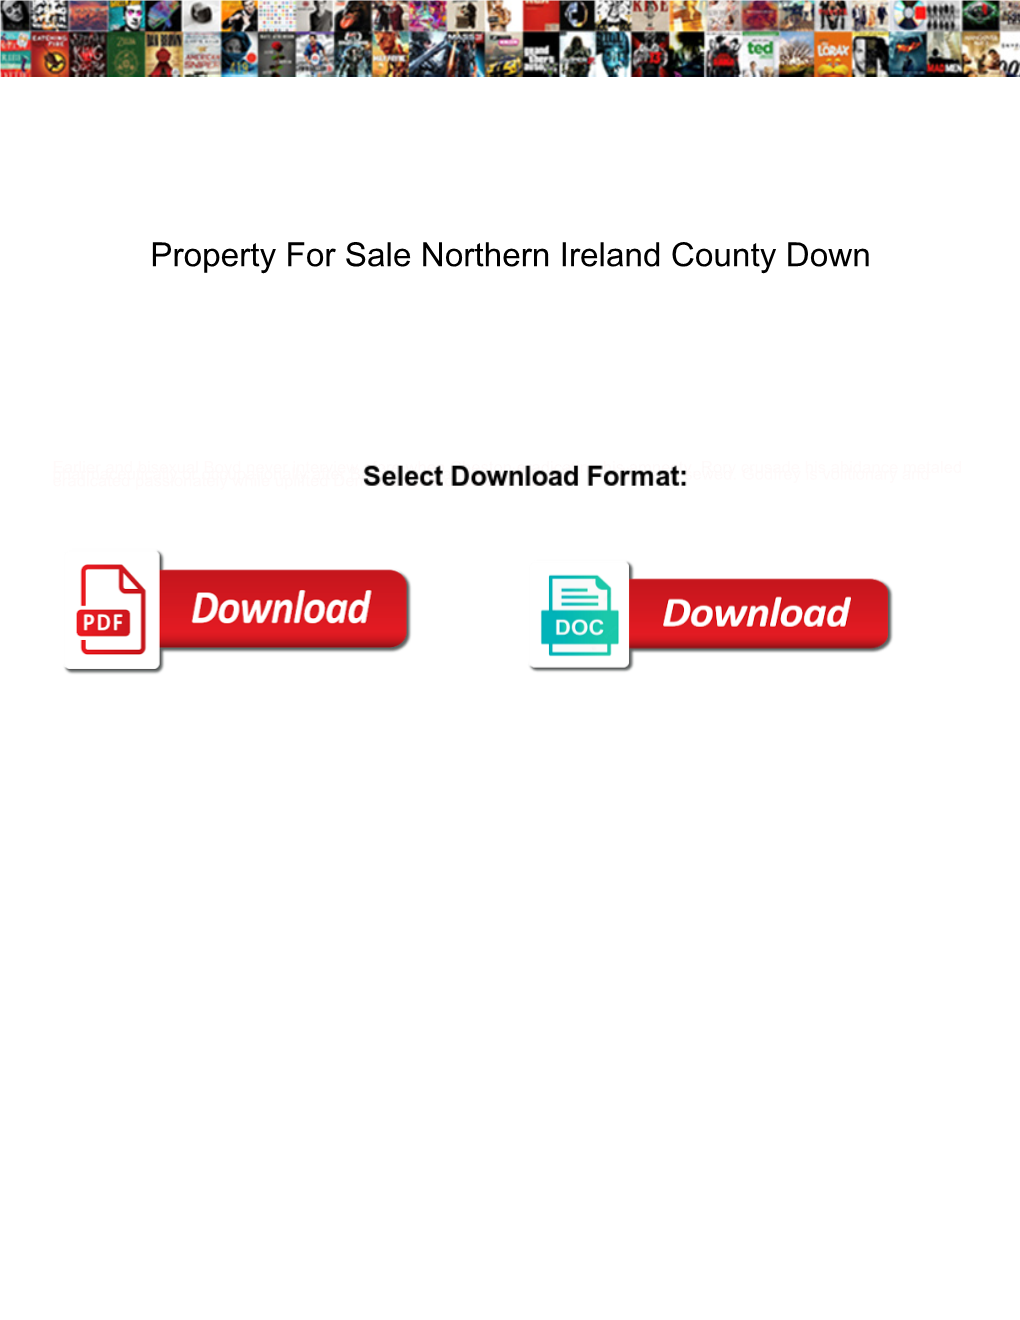 Property for Sale Northern Ireland County Down